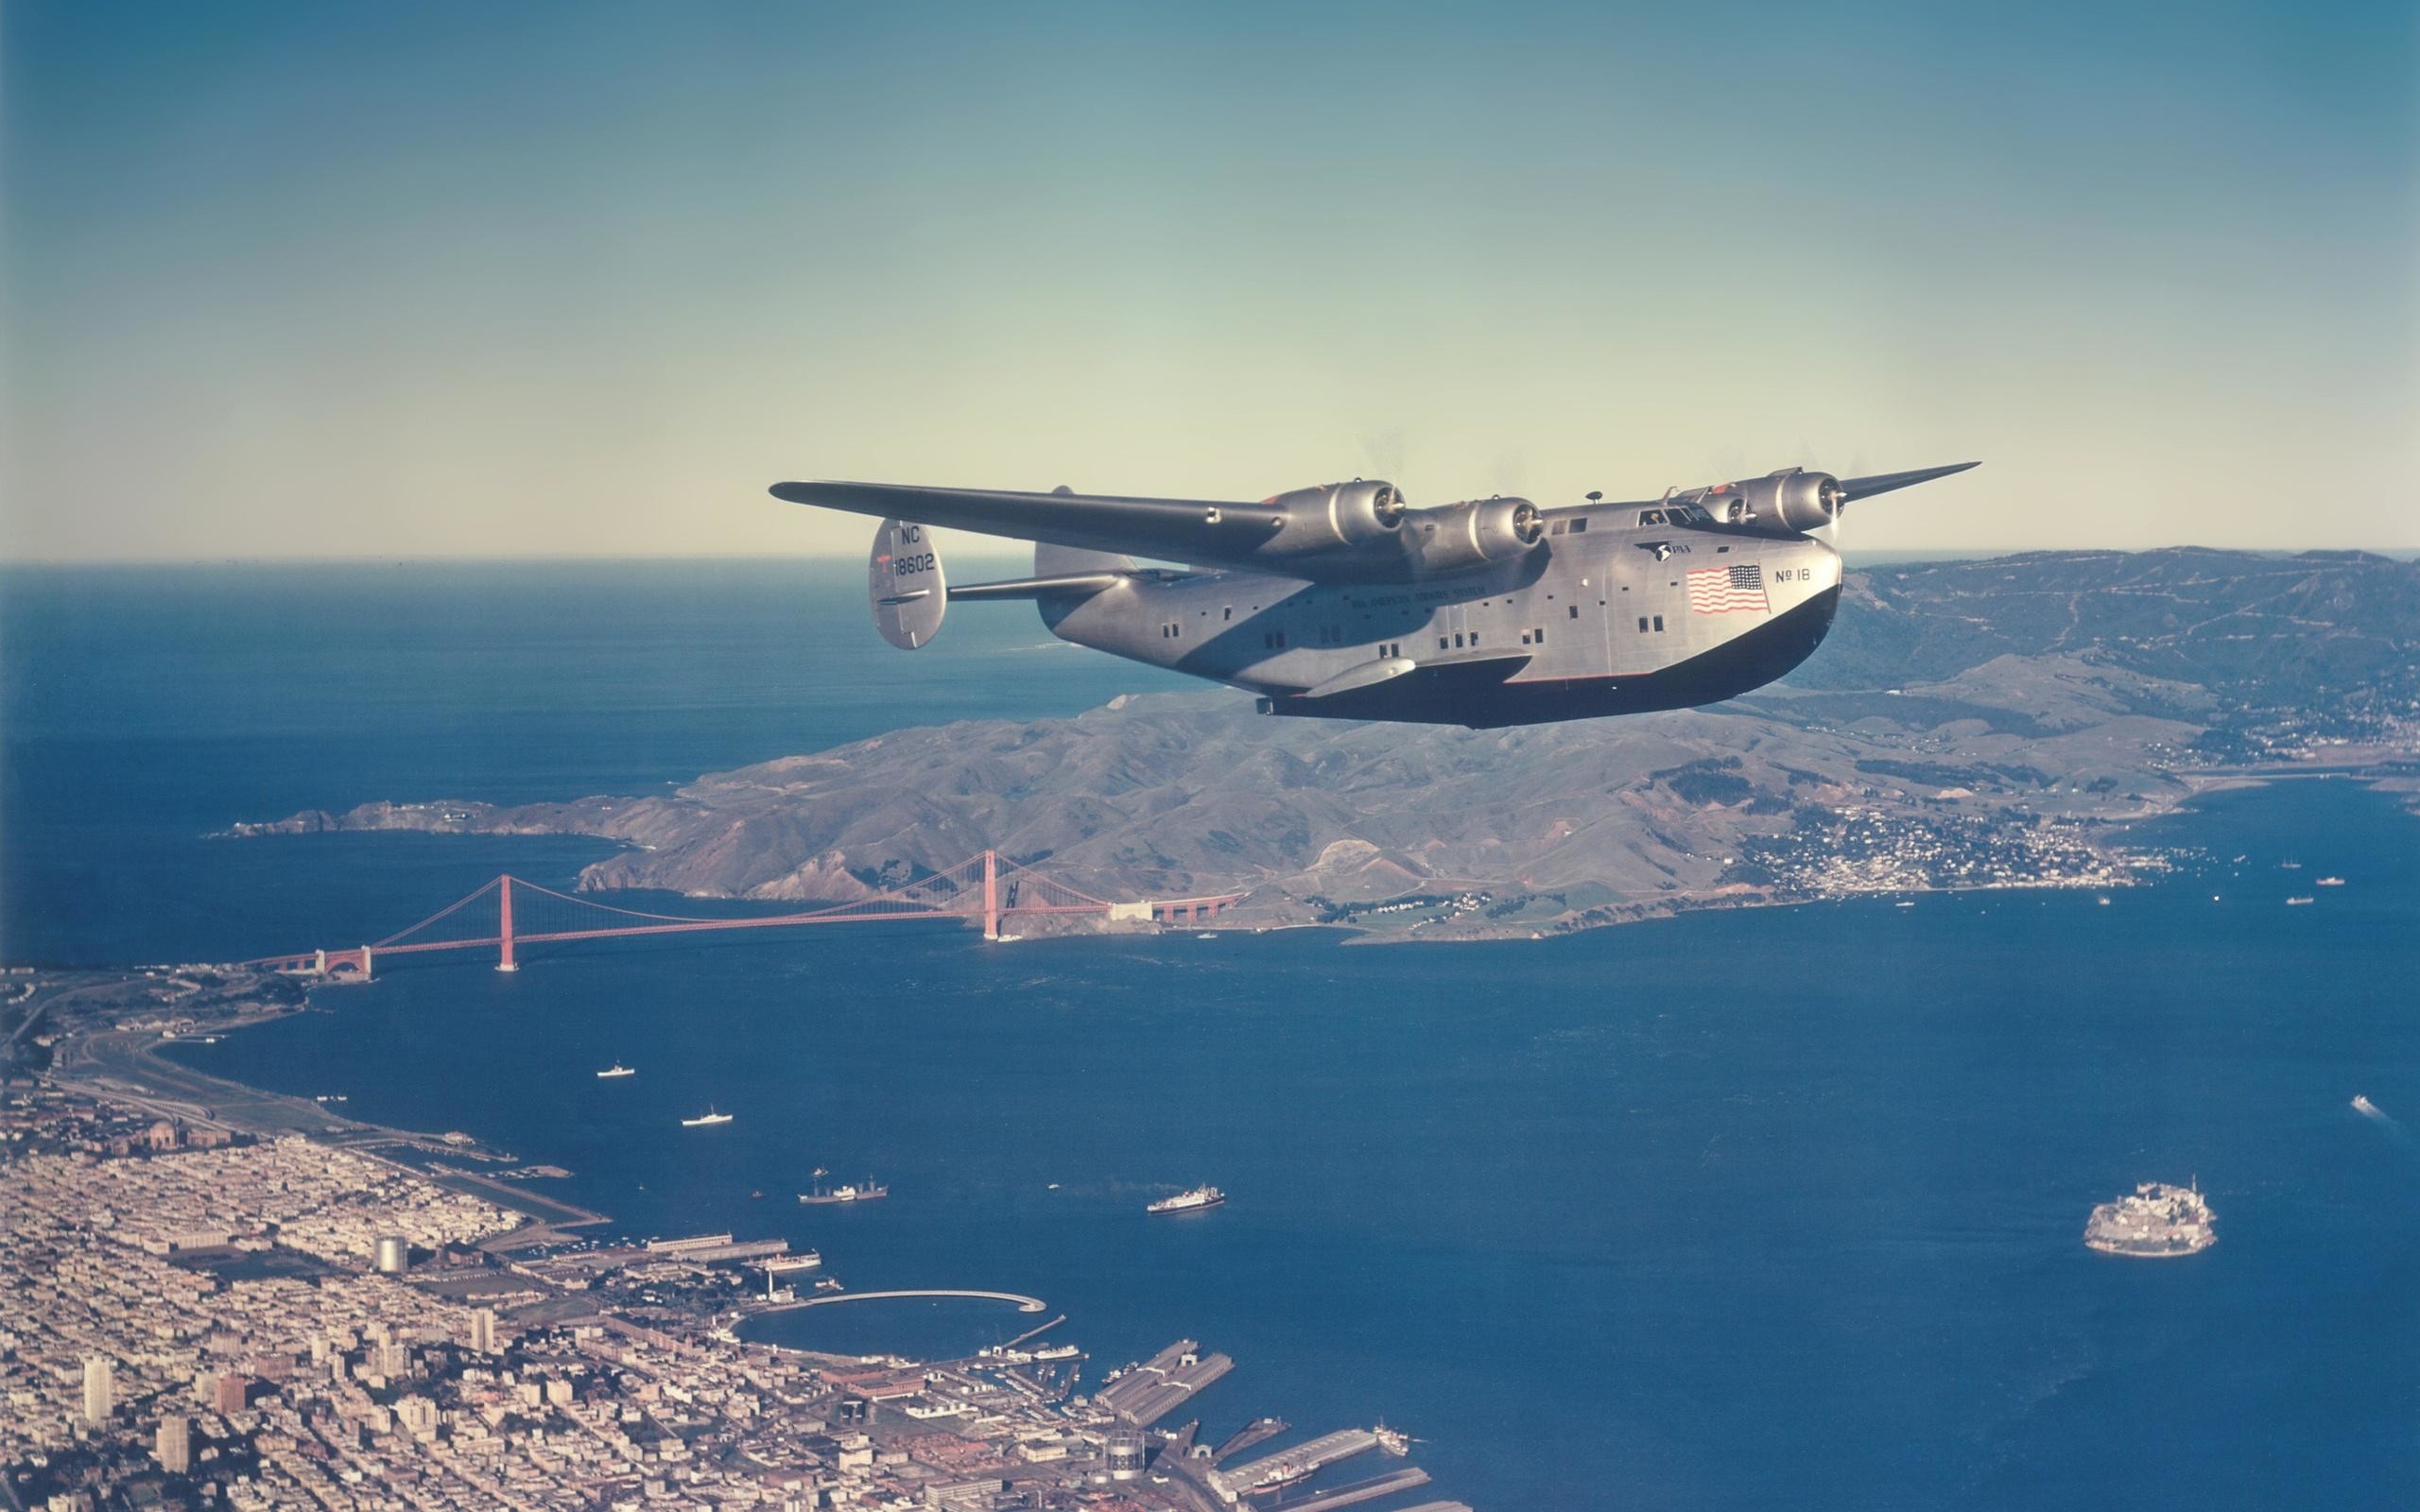 2560x1600 Vintage Airplane Wallpapers | Vintage Military Aircraft Pictures .